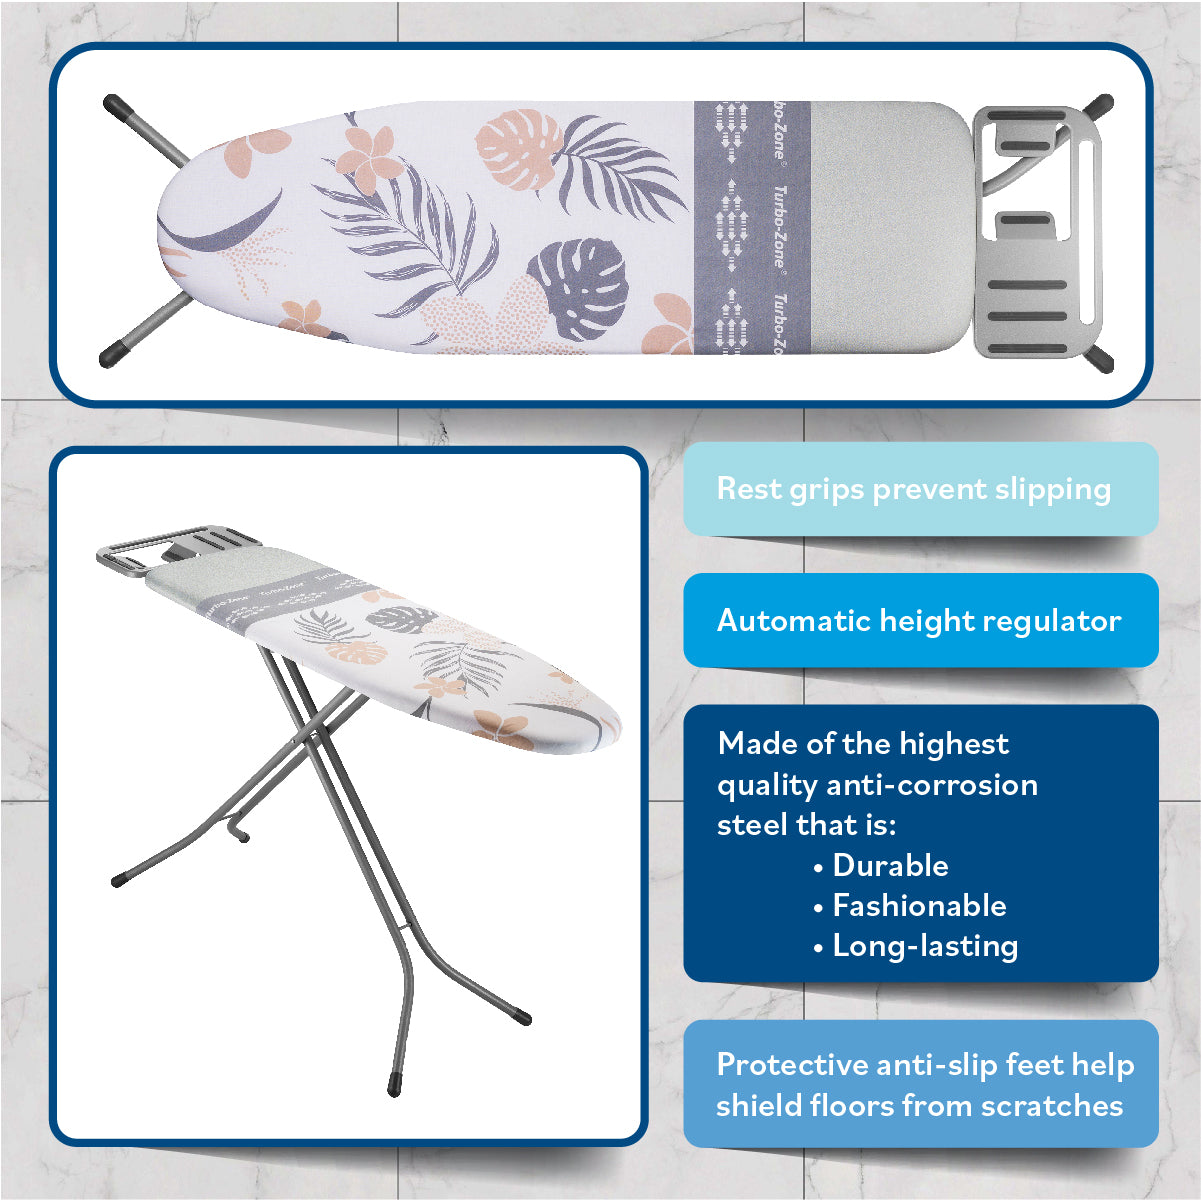 Bartnelli Heavy Duty Ironing Board 48x15 | Designed & Made in Europe with Patent Technology, Turbo & Park Zone, Features: 4 Layer Cover &Pad,Height-Adjustable,4 Premium Steel Legs,Upgraded Iron Rest (TROPICAL)